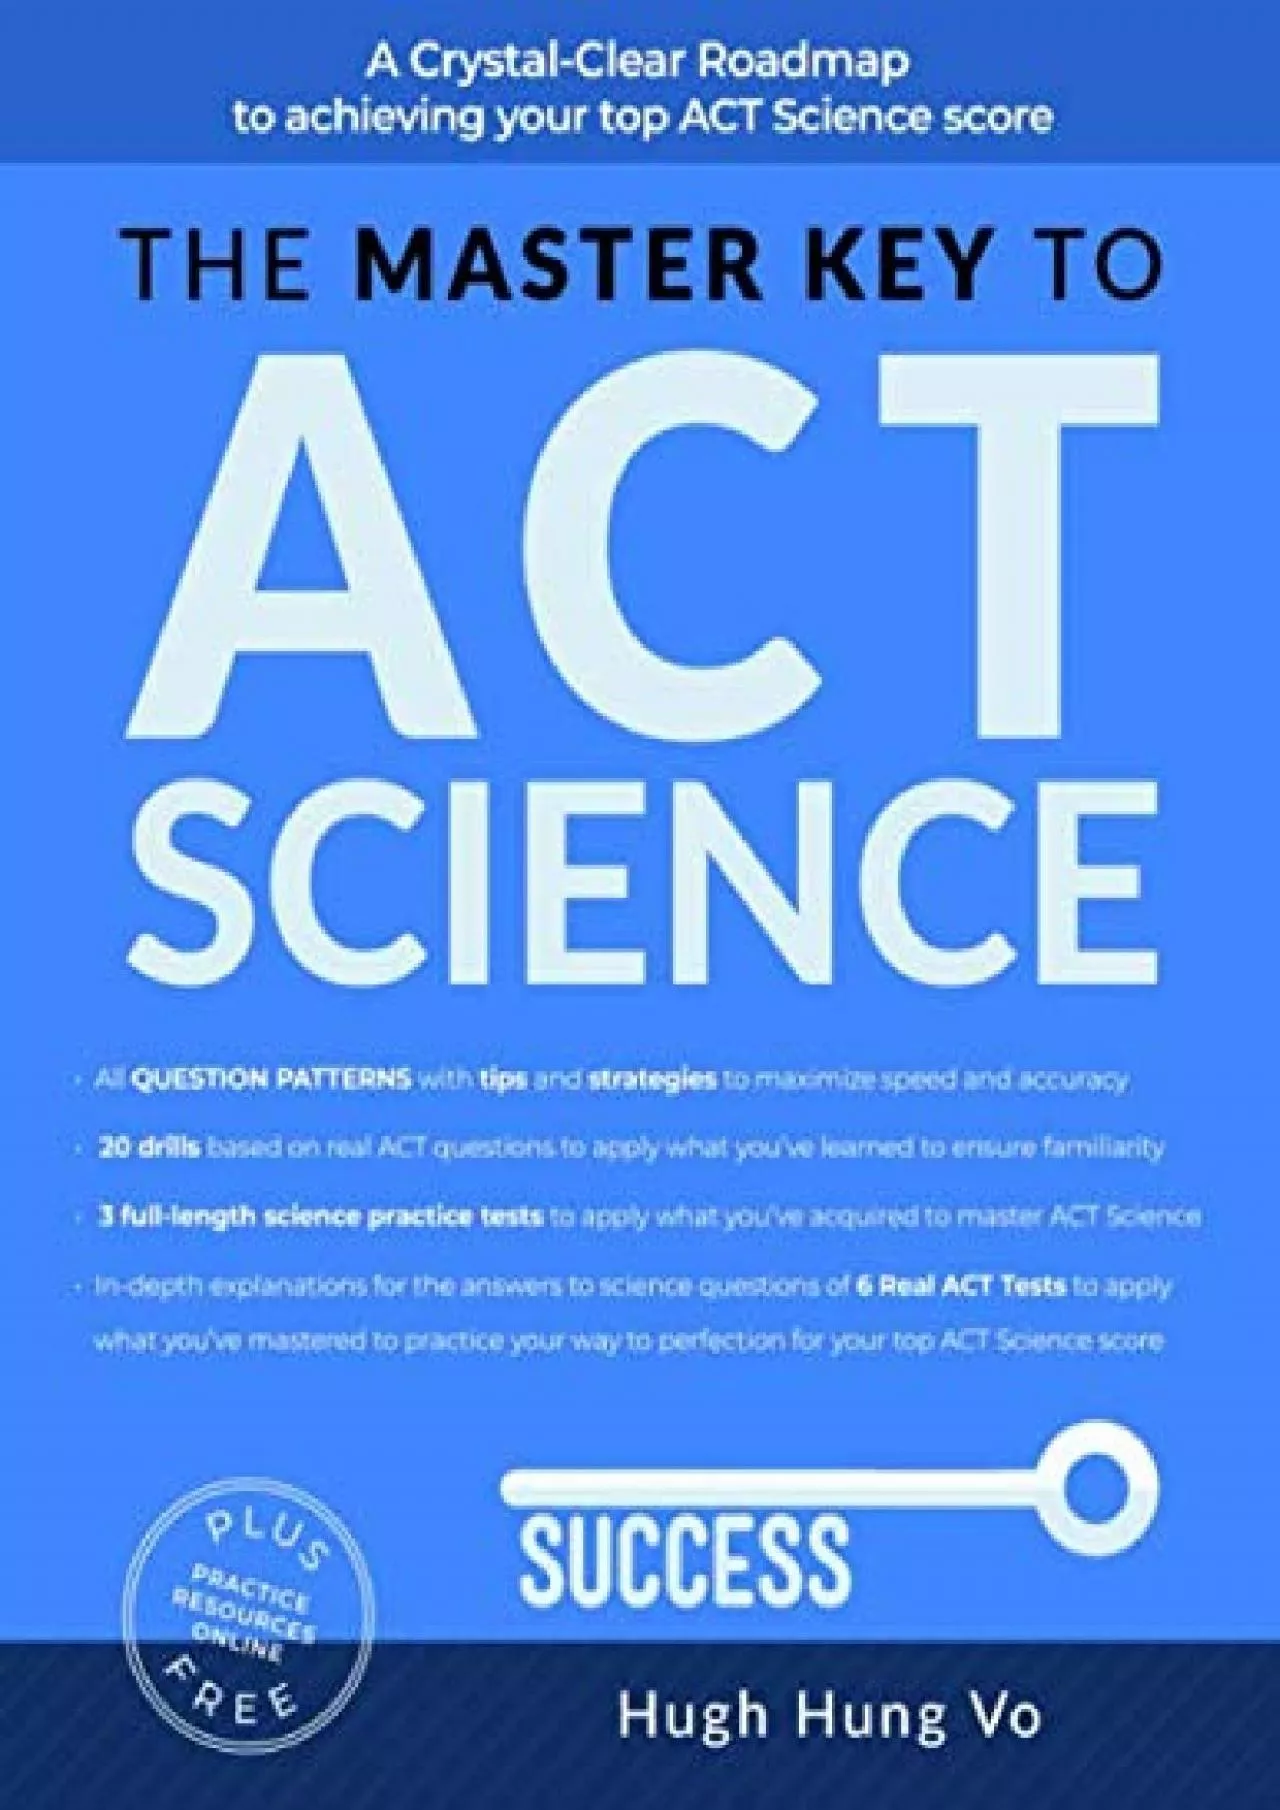 [EBOOK] THE MASTER KEY TO ACT SCIENCE: A crystal-clear roadmap to achieving your top ACT